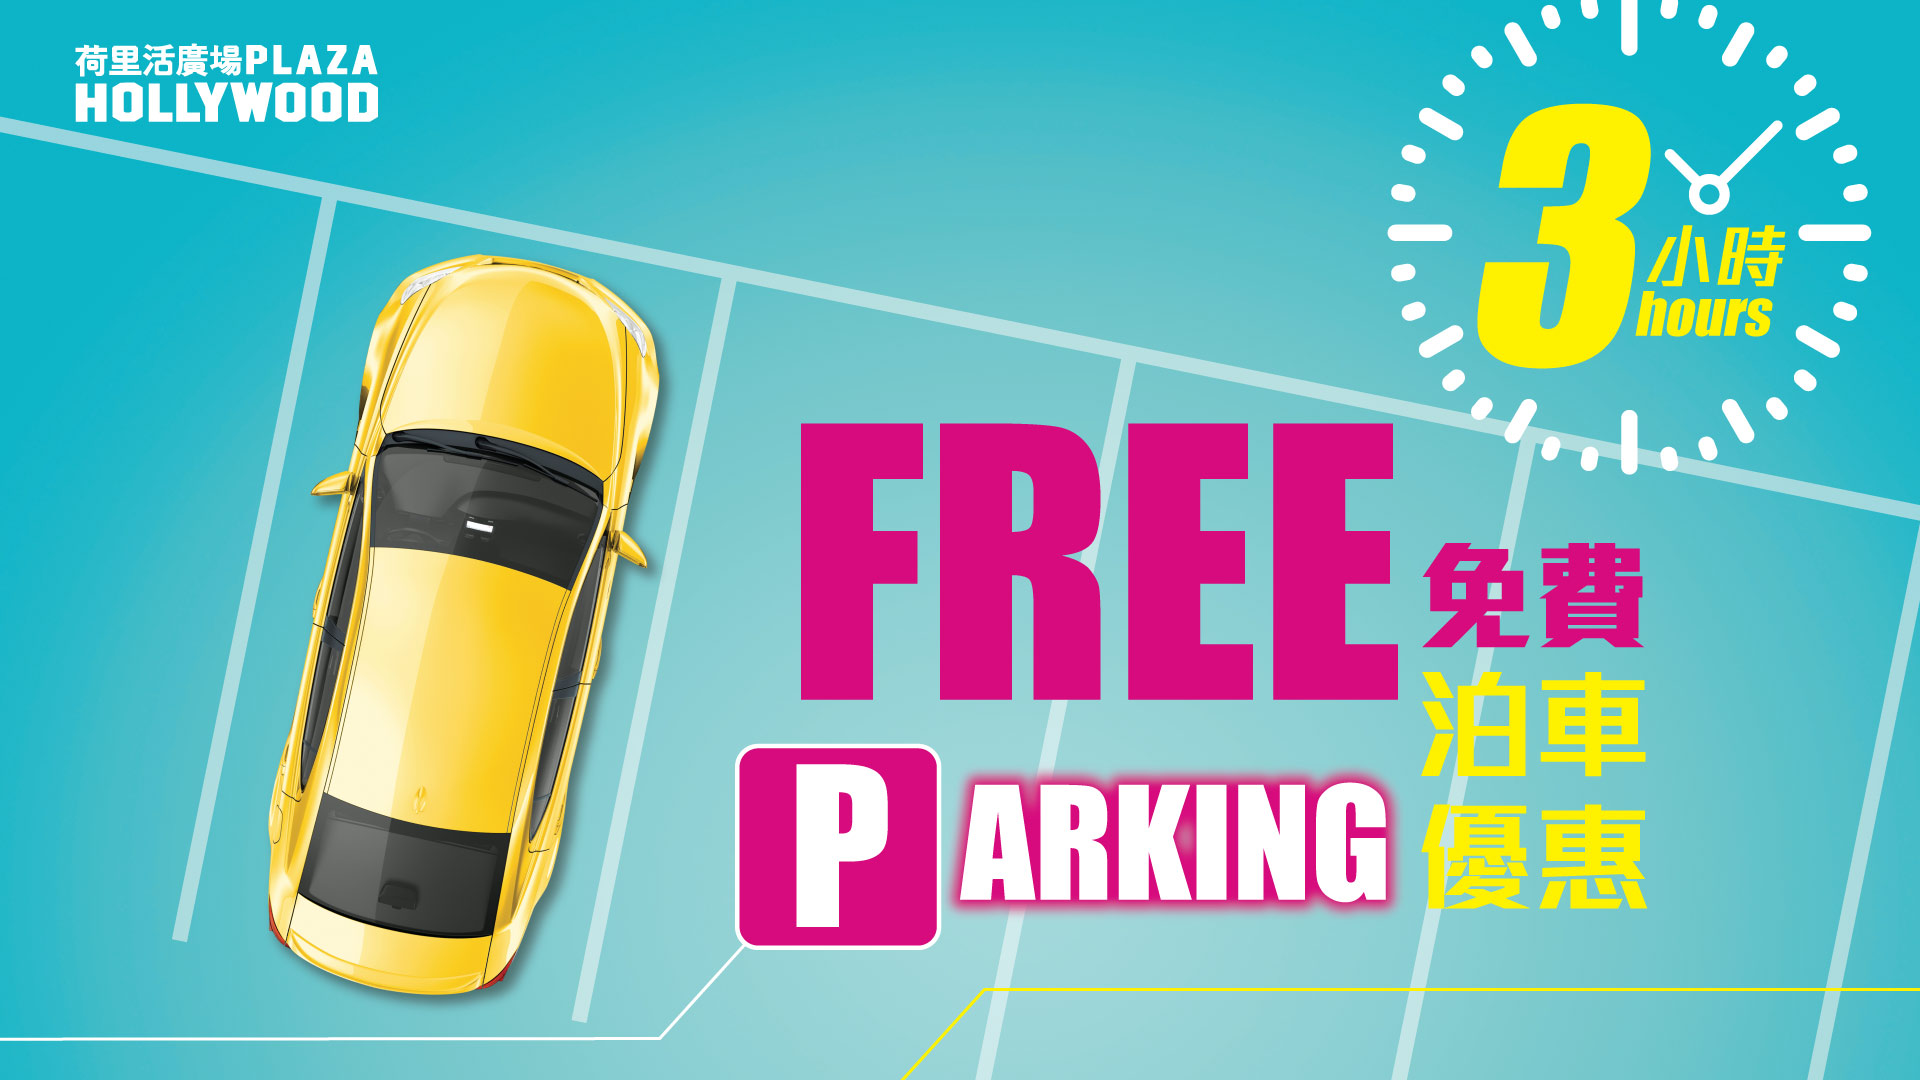 3 Hours Complementary FREE Parking